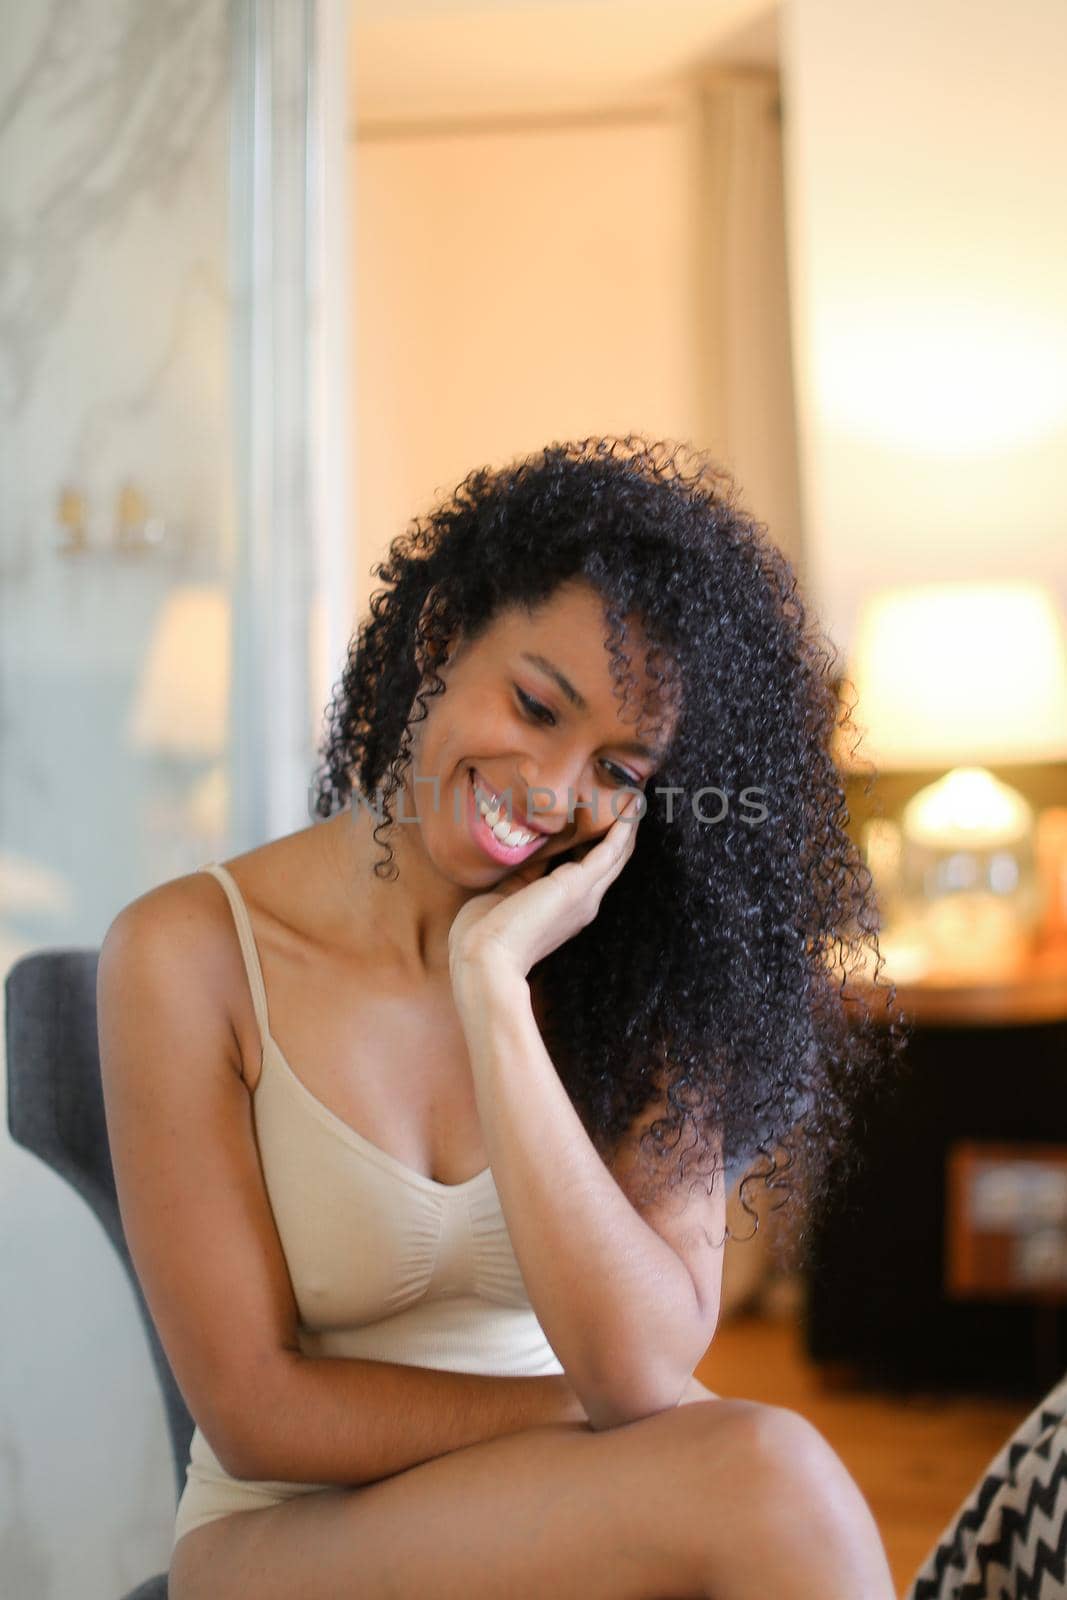 Young pretty afro american woman sitting in room and wearing beige swimsuit. Concept of hotel photo session in lingerie.